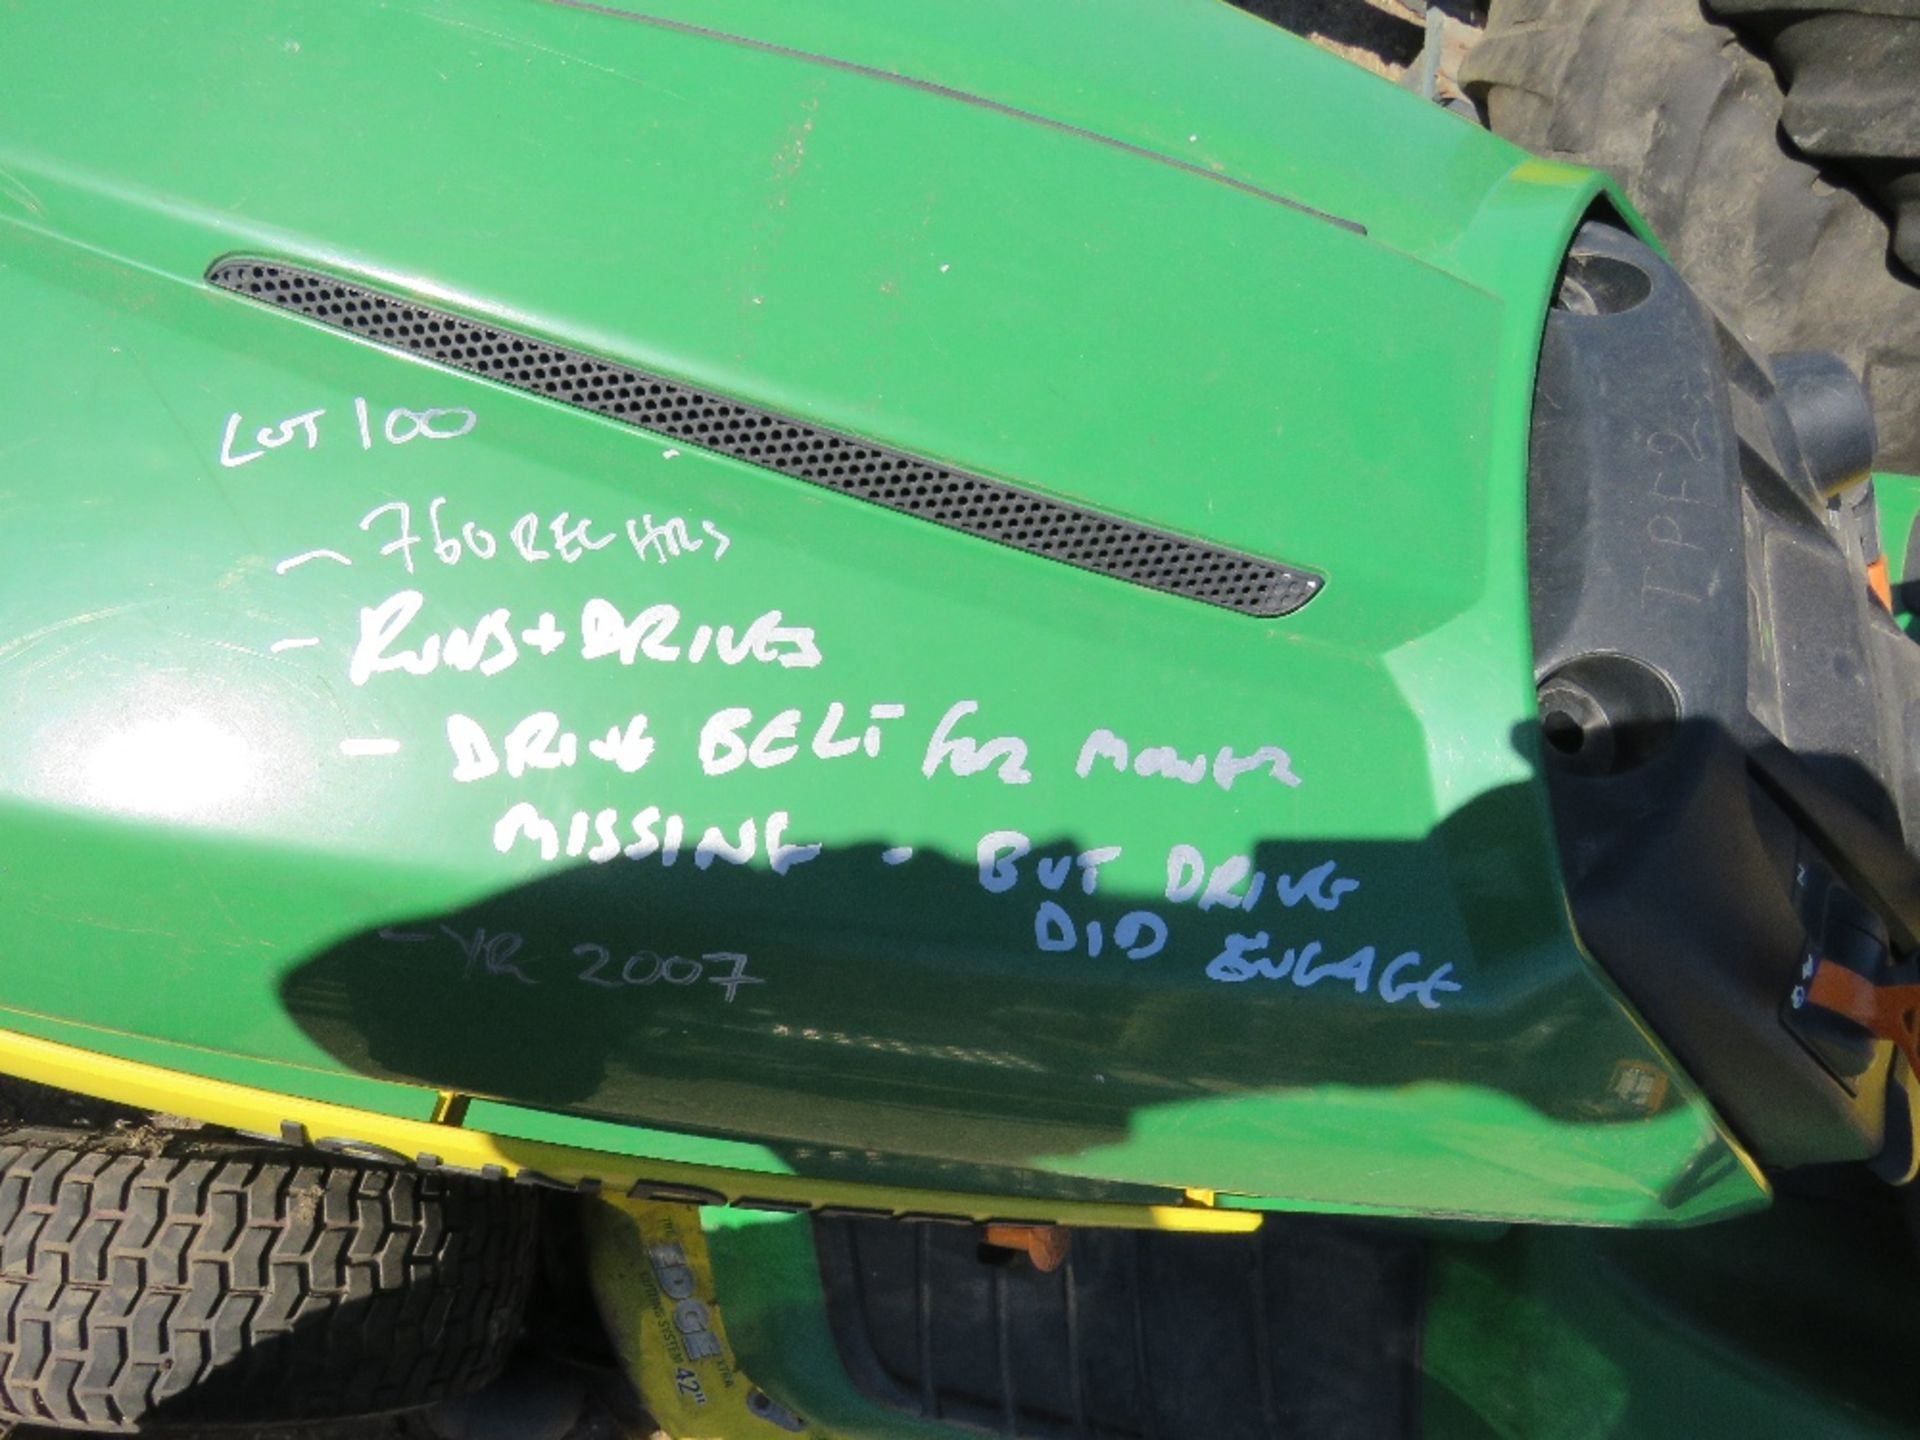 JOHN DEERE X540 PROFESSIONAL RIDE ON PETROL MOWER. PREVIOUS COUNCIL USEAGE. STRAIGHT FROM STORAGE, - Image 5 of 5